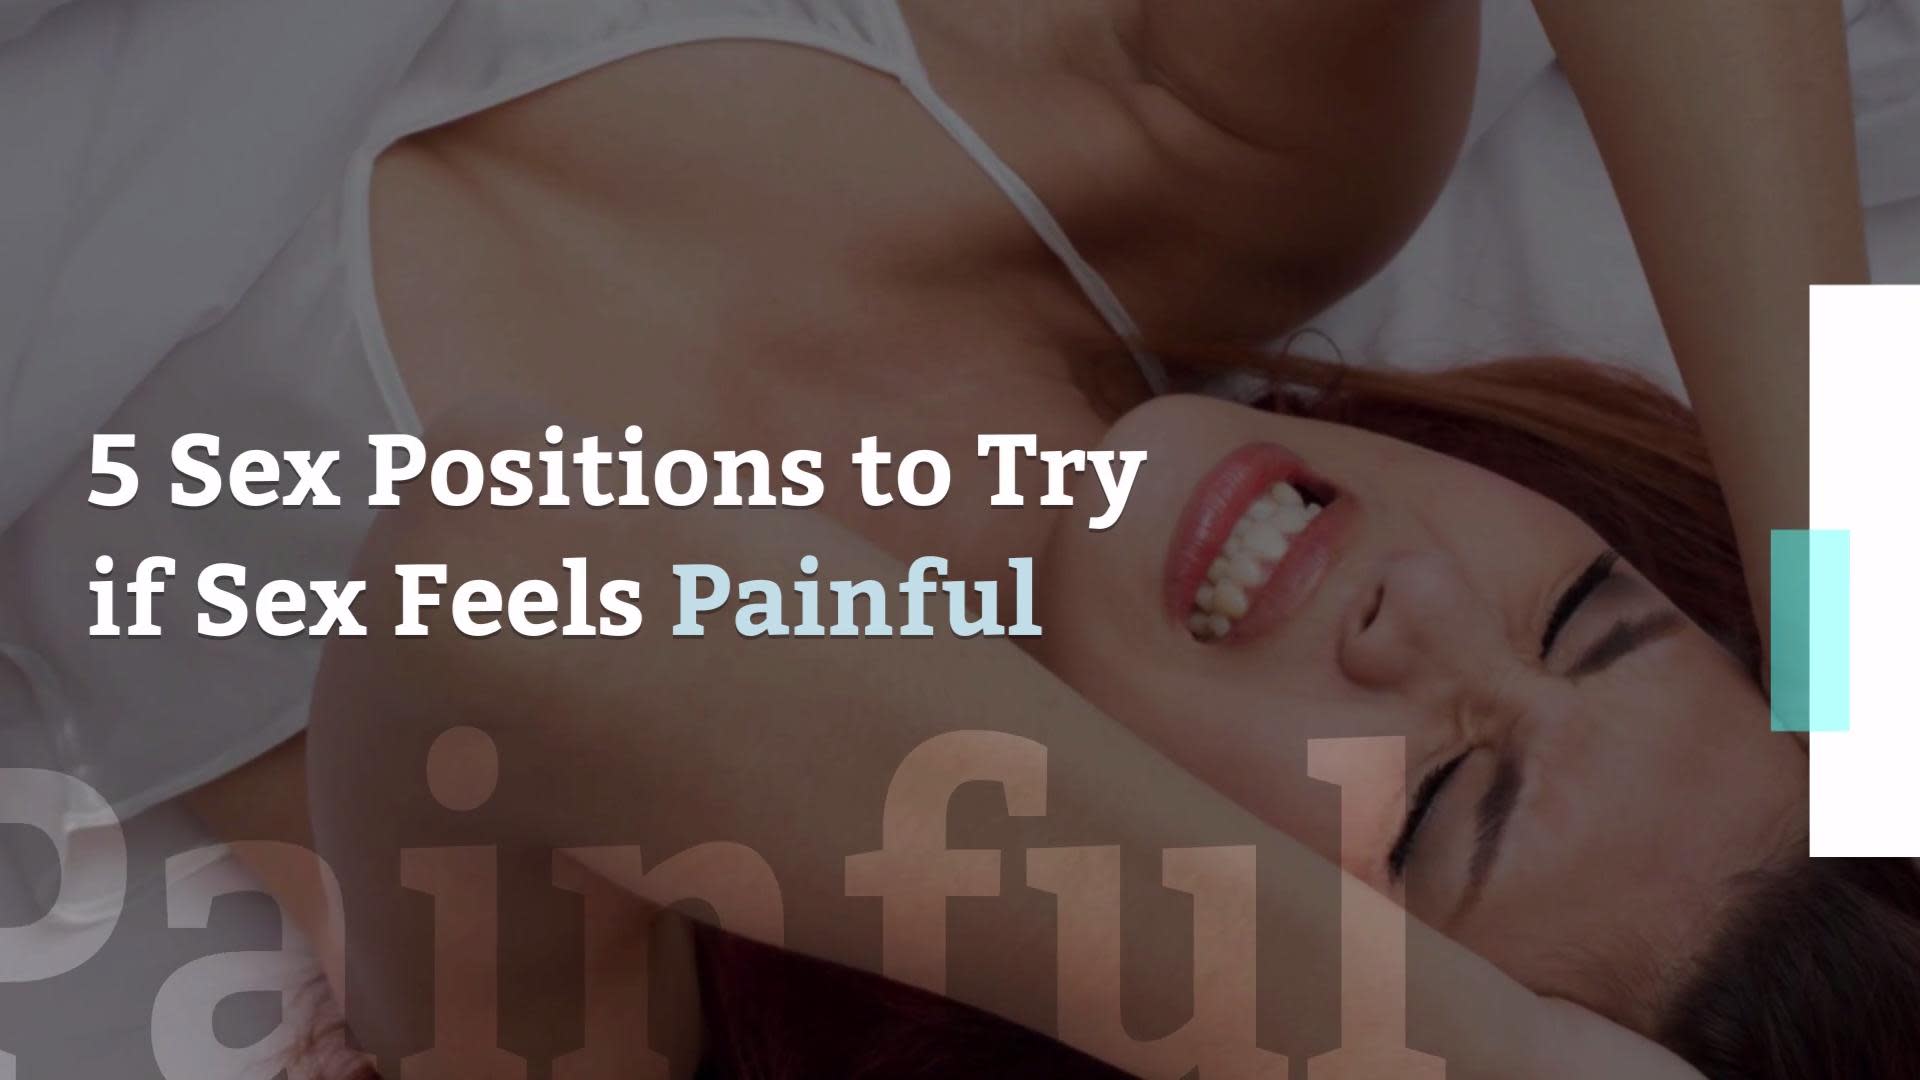 6 Sex Positions to Try if Sex Is Painful picture image